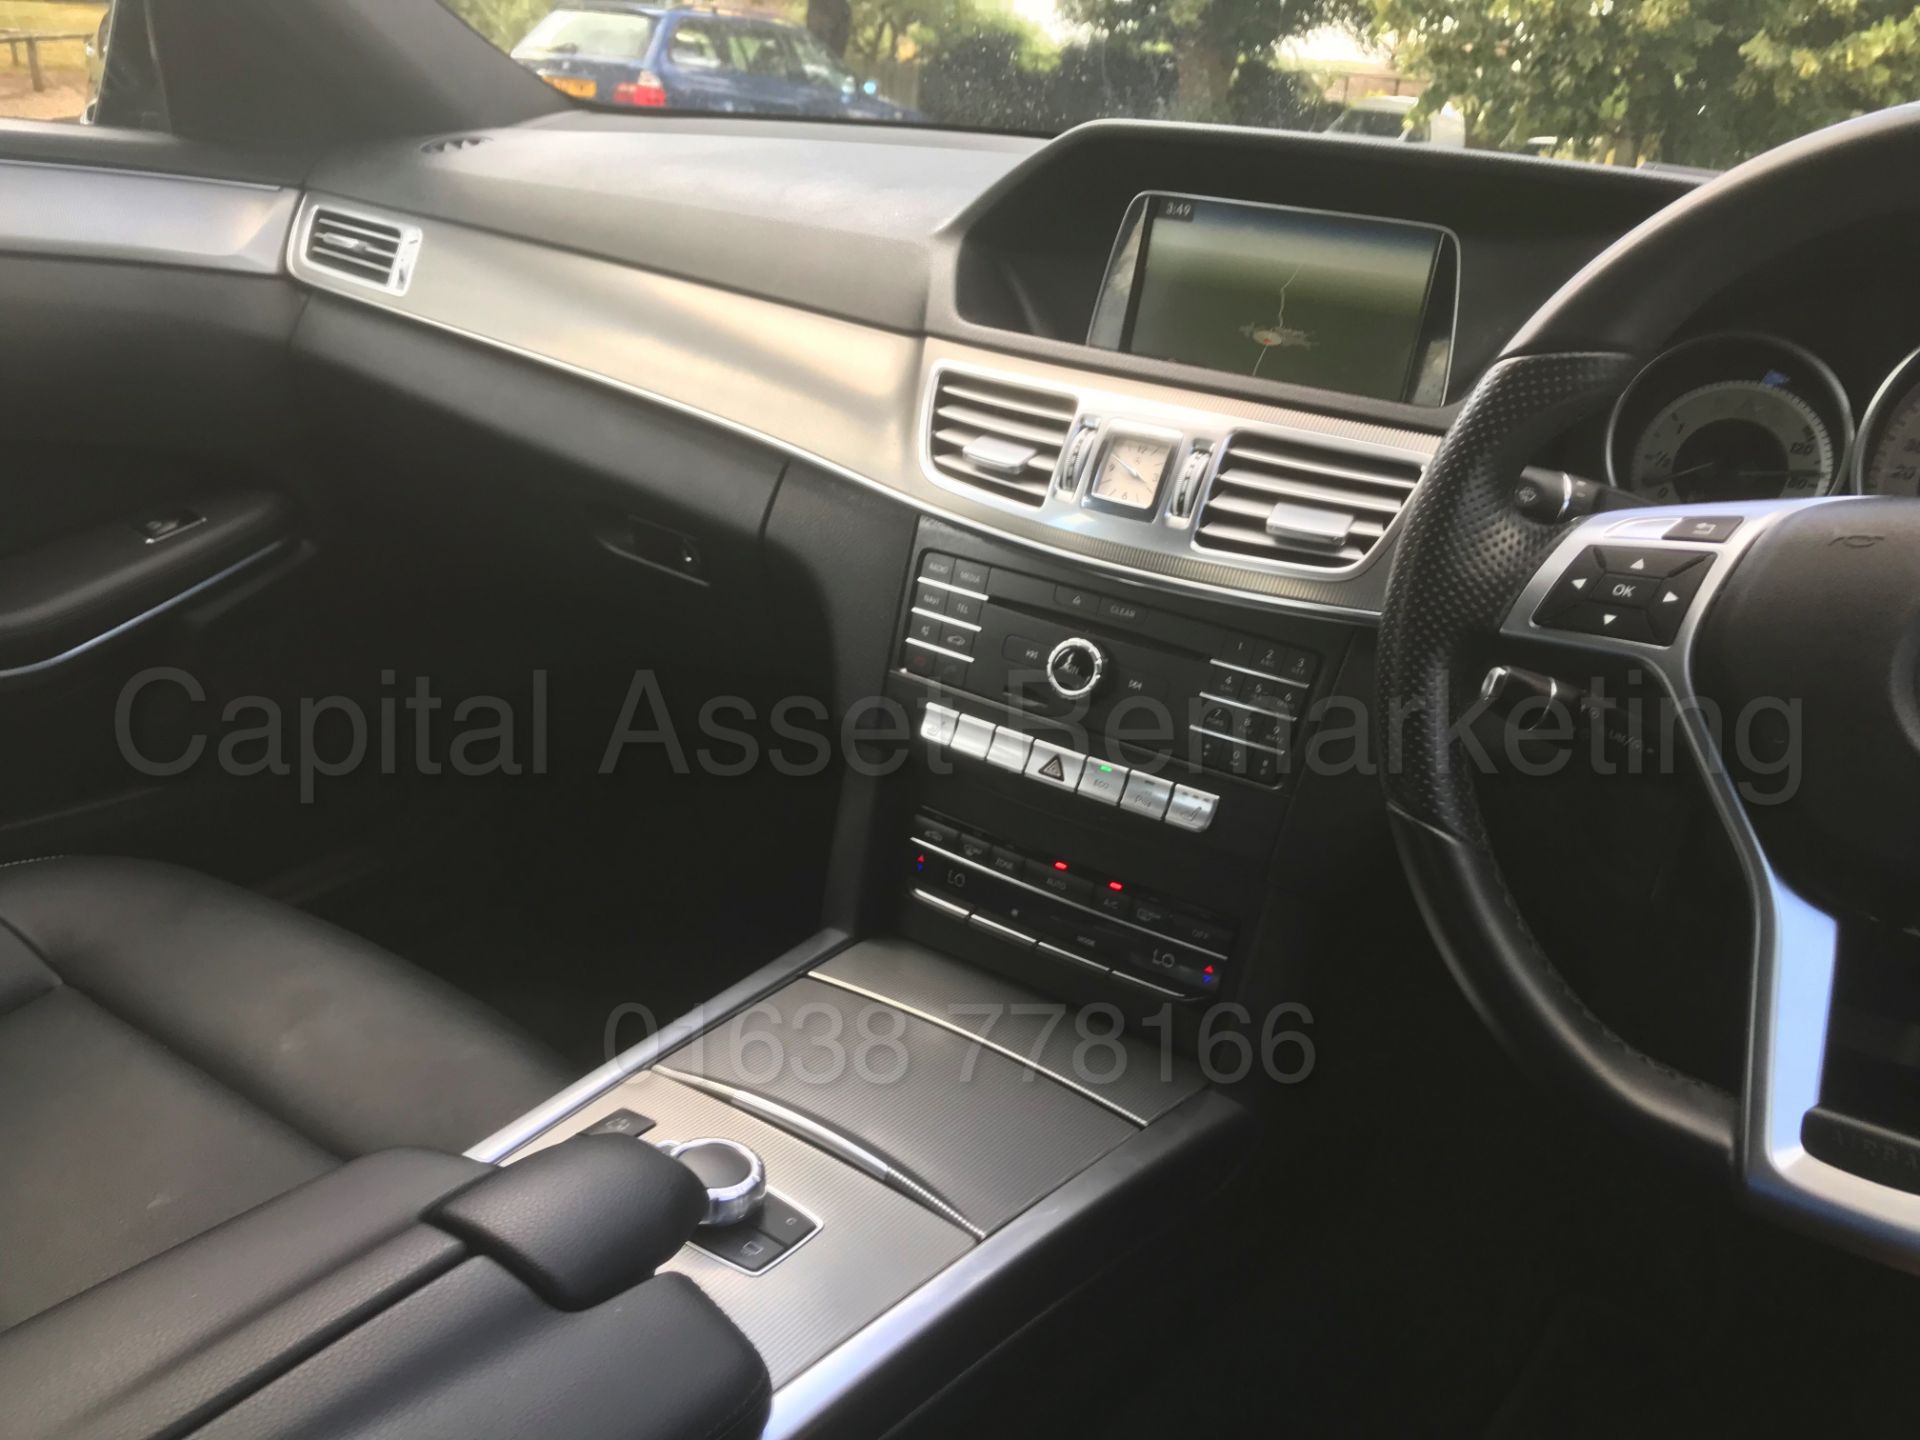 MERCEDES-BENZ E220D *AMG - NIGHT EDITION* SALOON (2016) '7G AUTO - LEATHER - SAT NAV' *LOW MILES* - Image 33 of 43